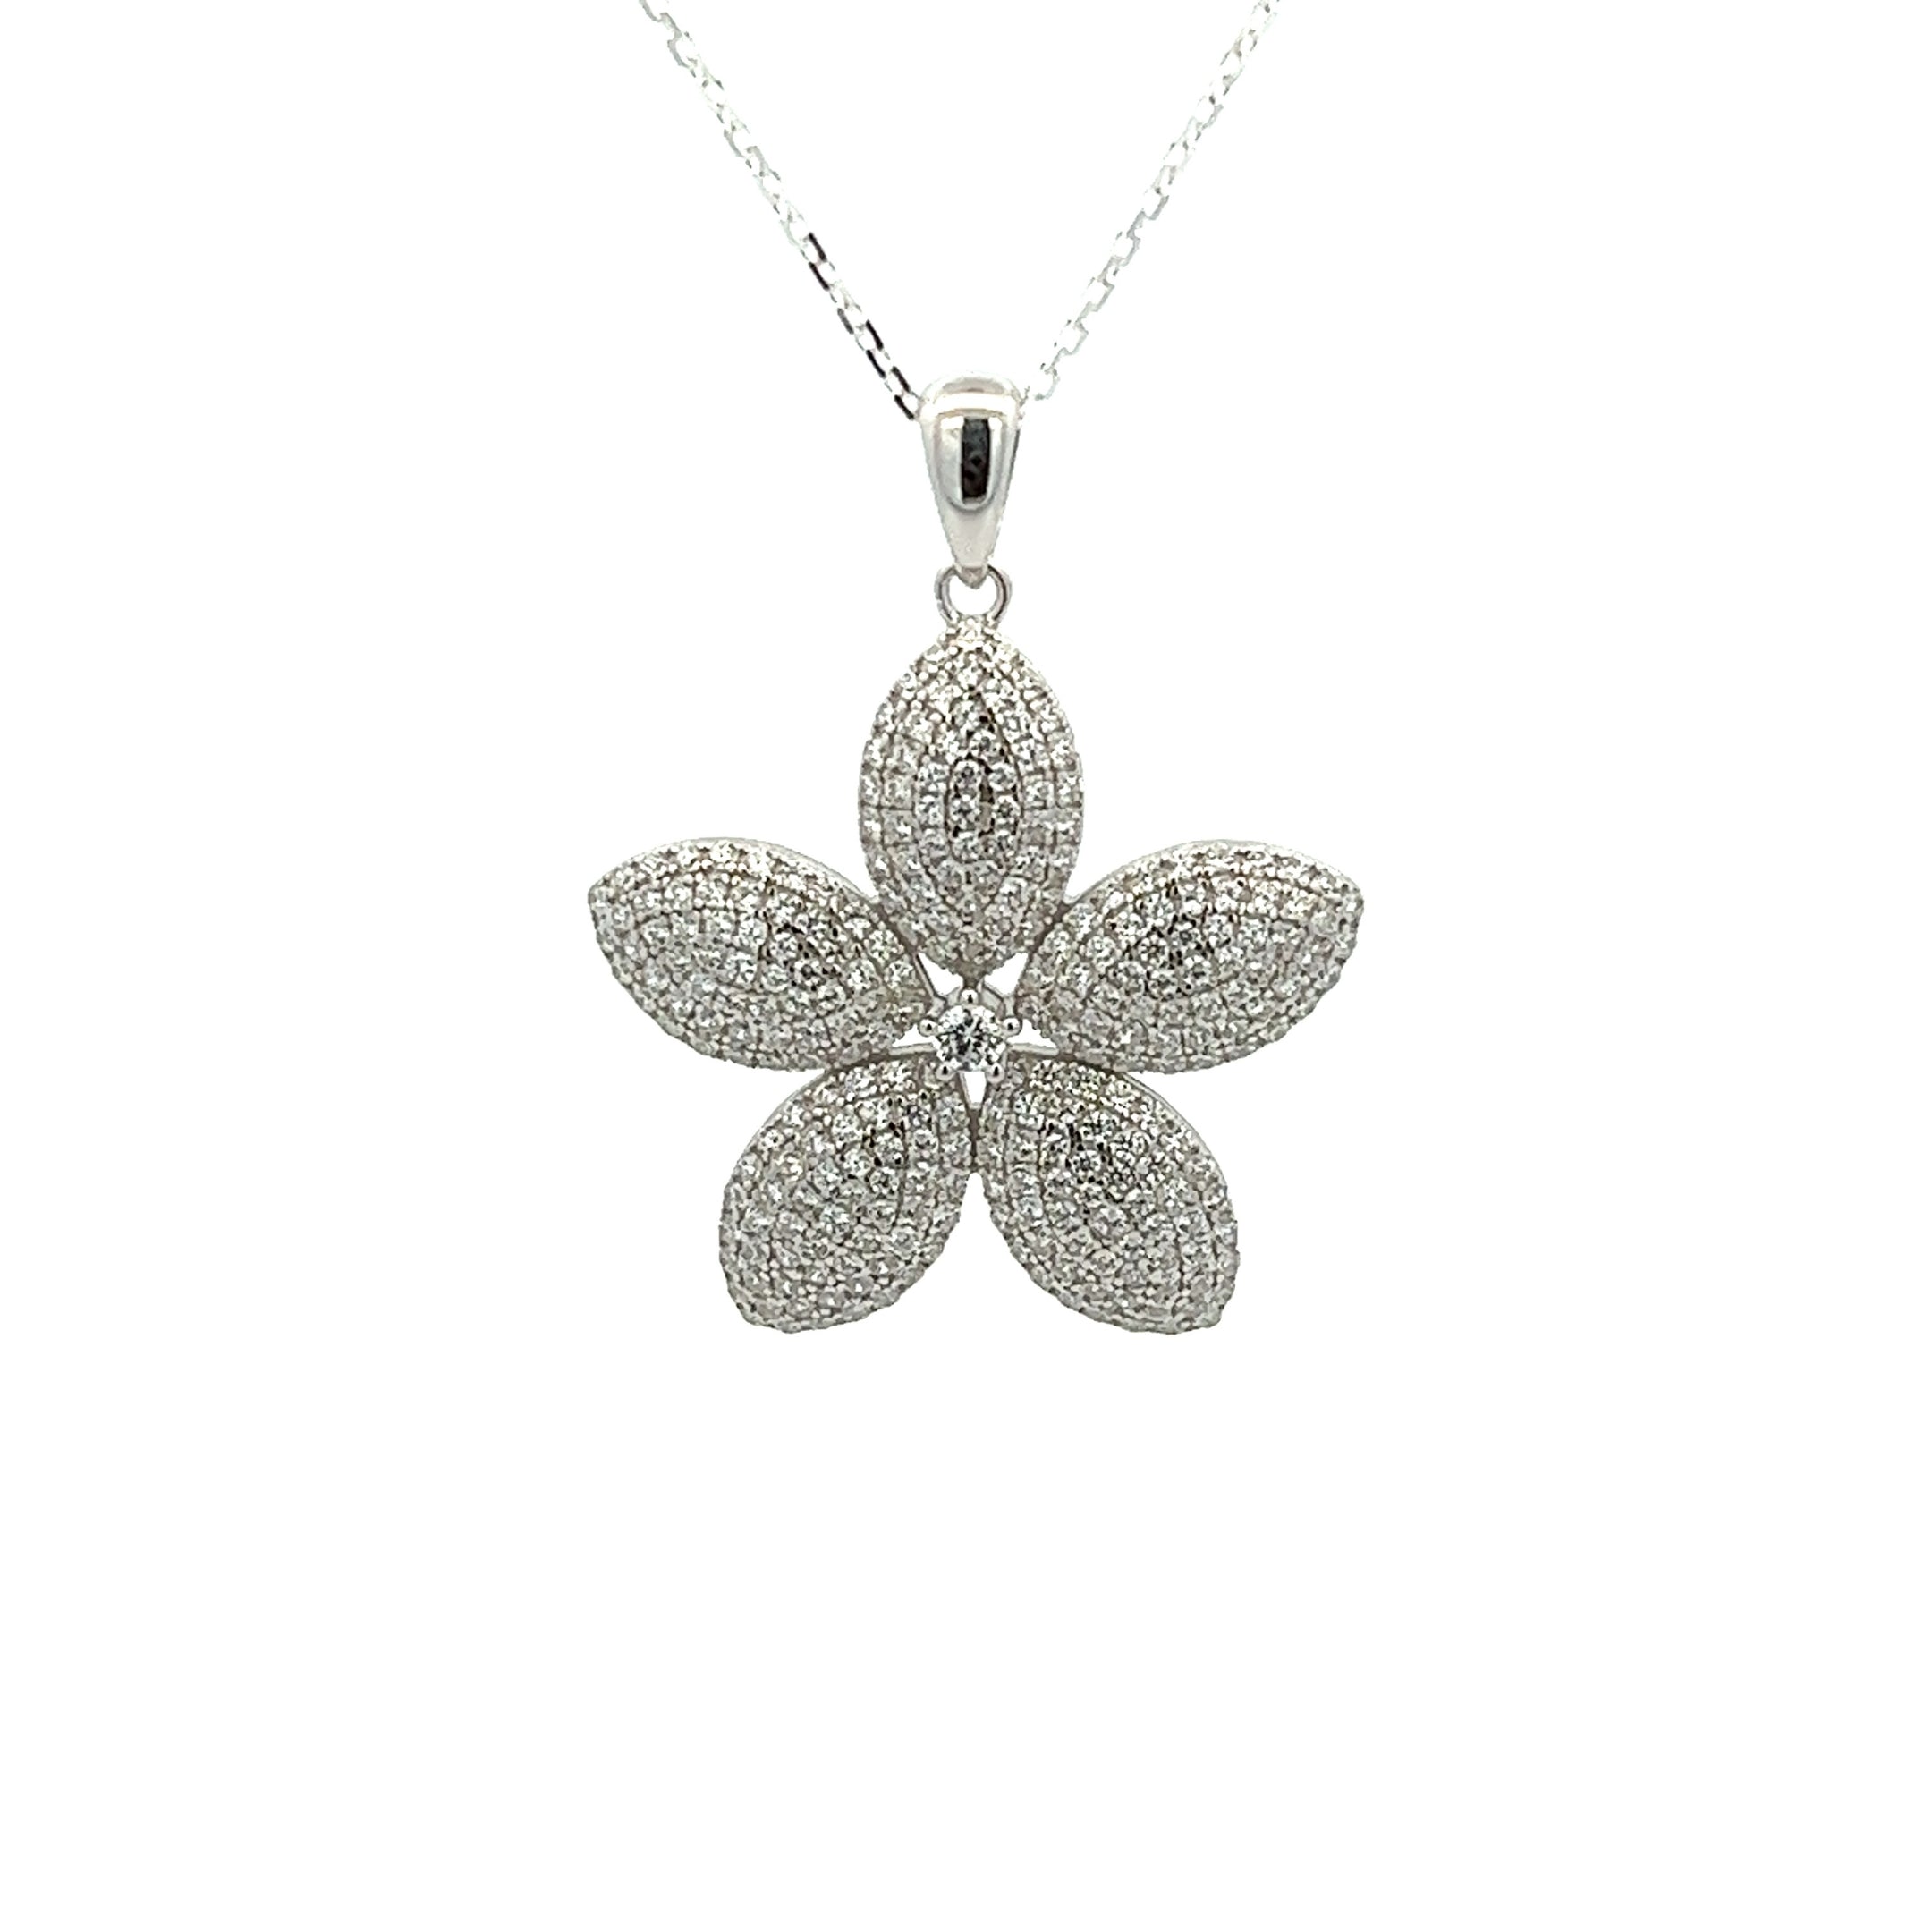 925 SILVER FLOWER PENDANT WITH CRYSTALS